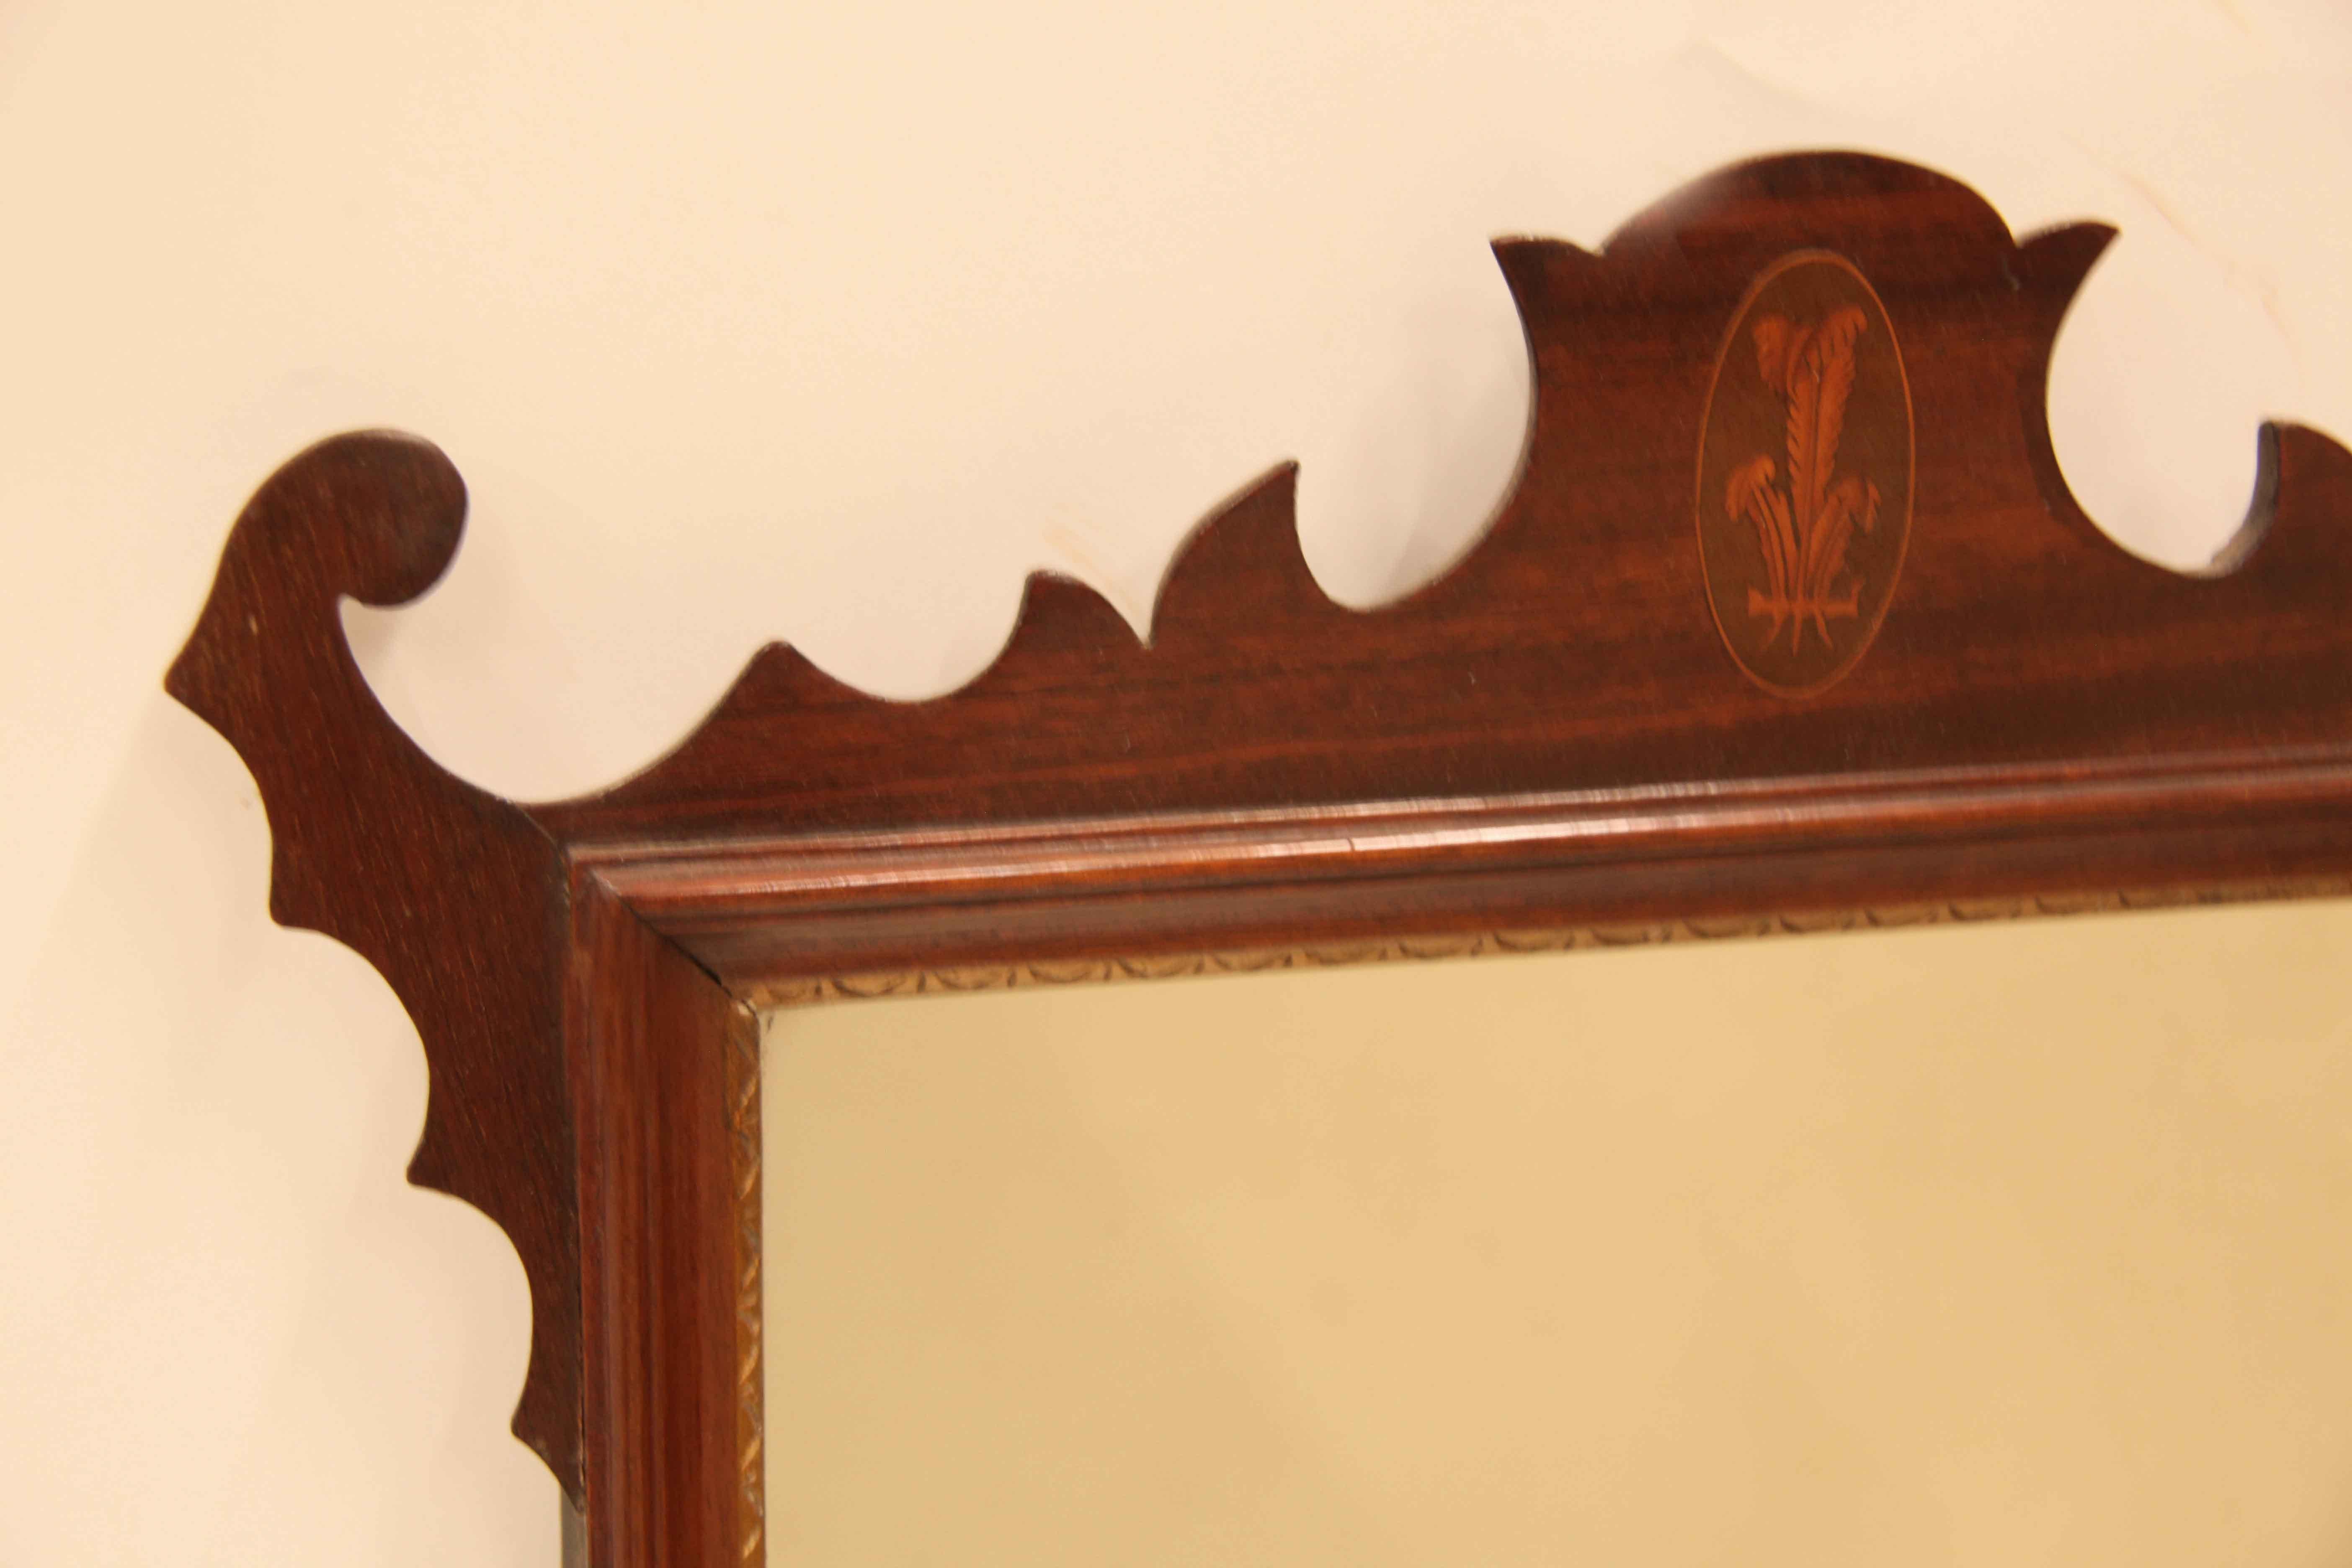 George III style inlaid mirror, the top has a beautiful design( repeats at the bottom) with a Prince of Wales plume inlaid in the center. The original glass mirror is framed by a hand etched demi lune motif in gold inside a concave molding.  This